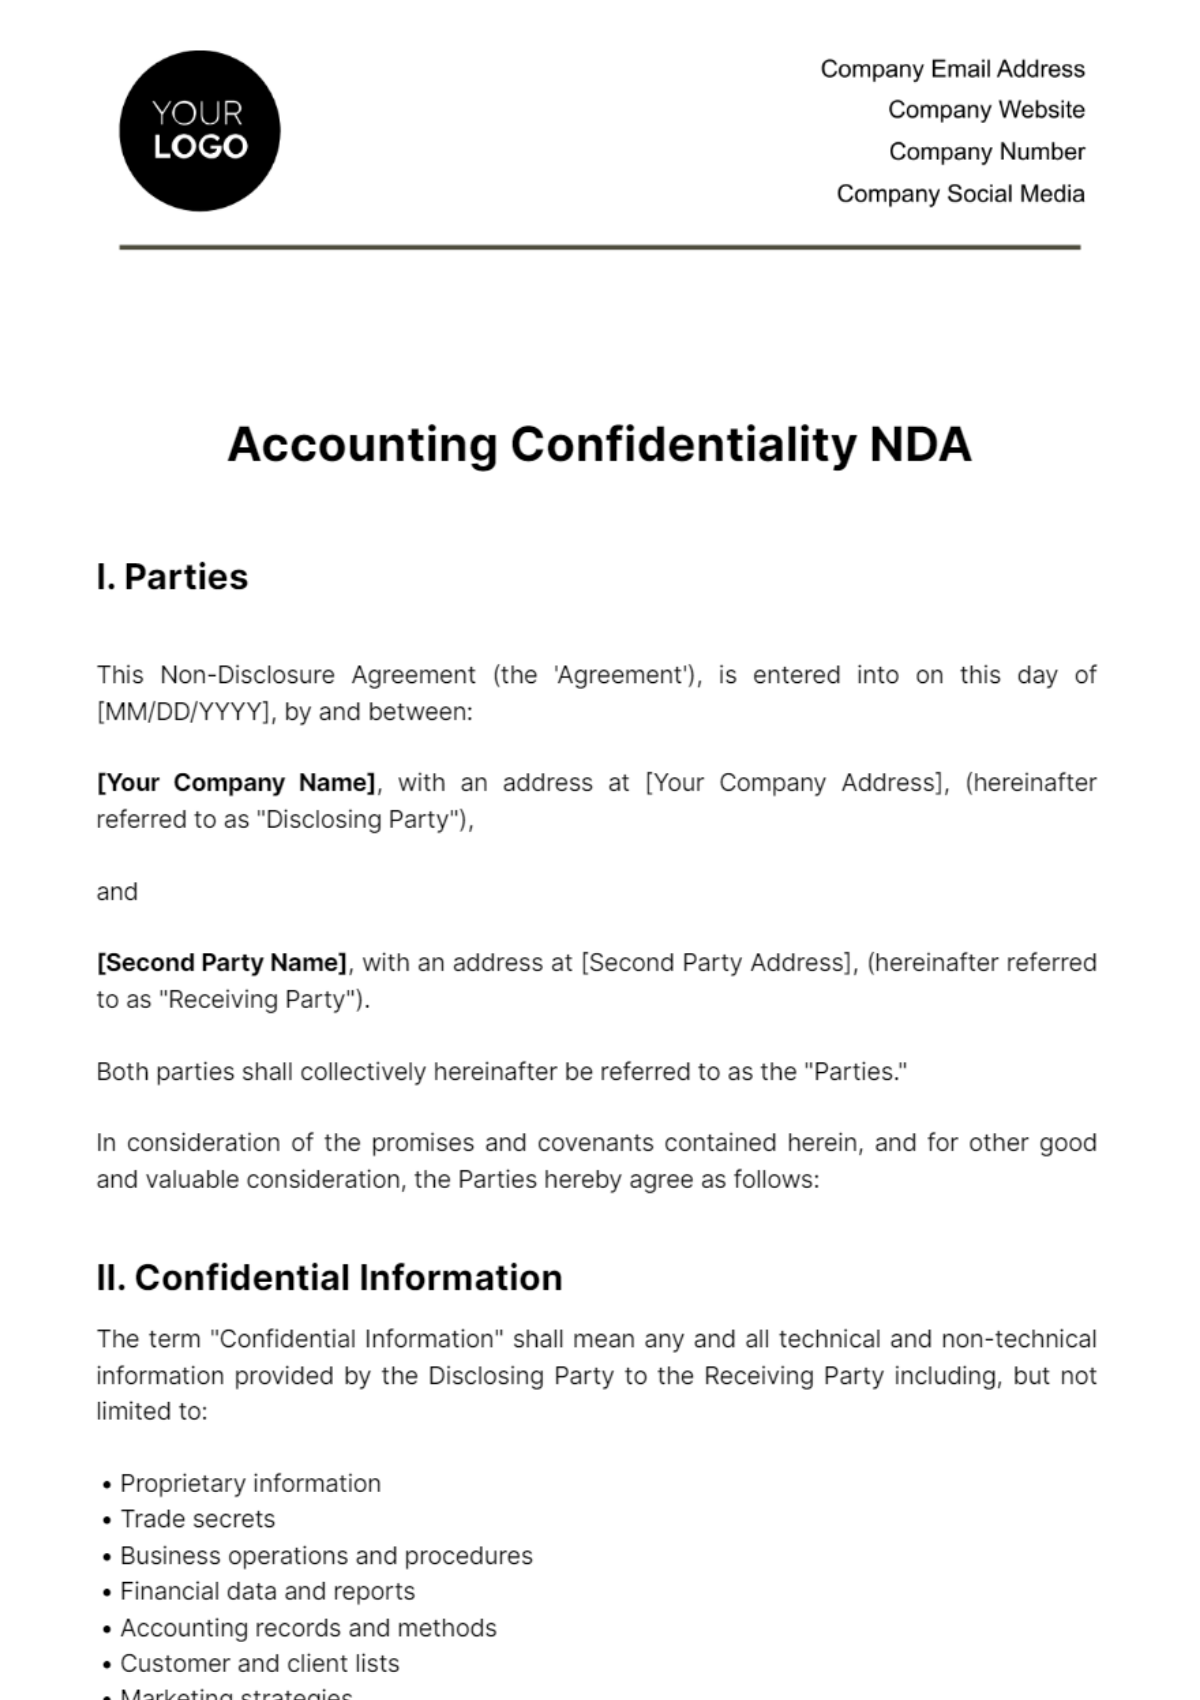 Accounting Confidentiality NDA Template